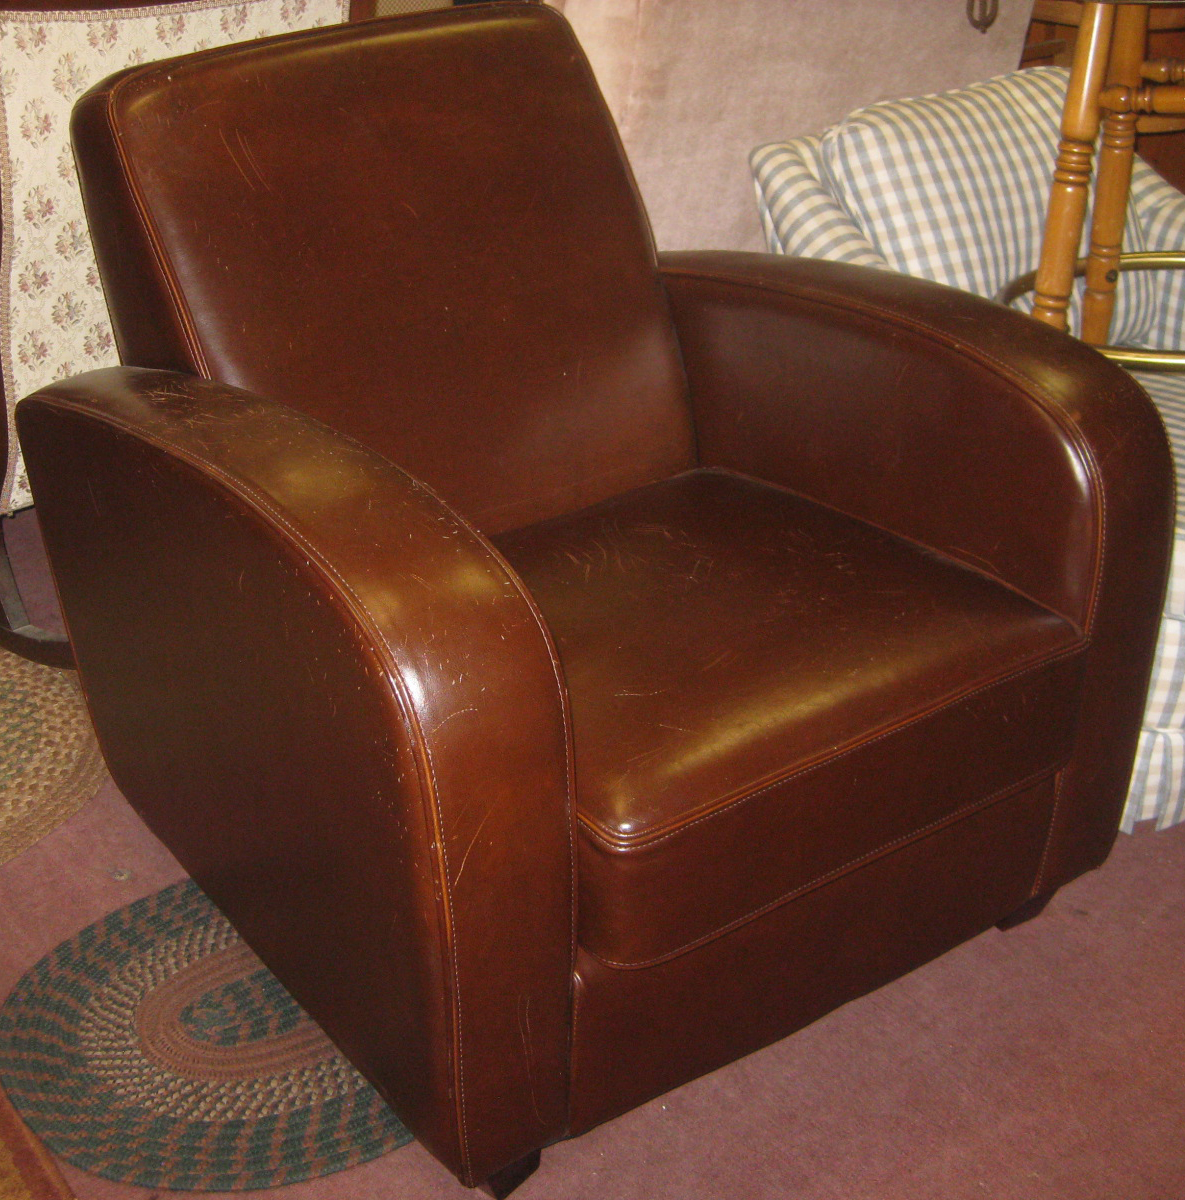 SOLD - Handsome Leather Chair